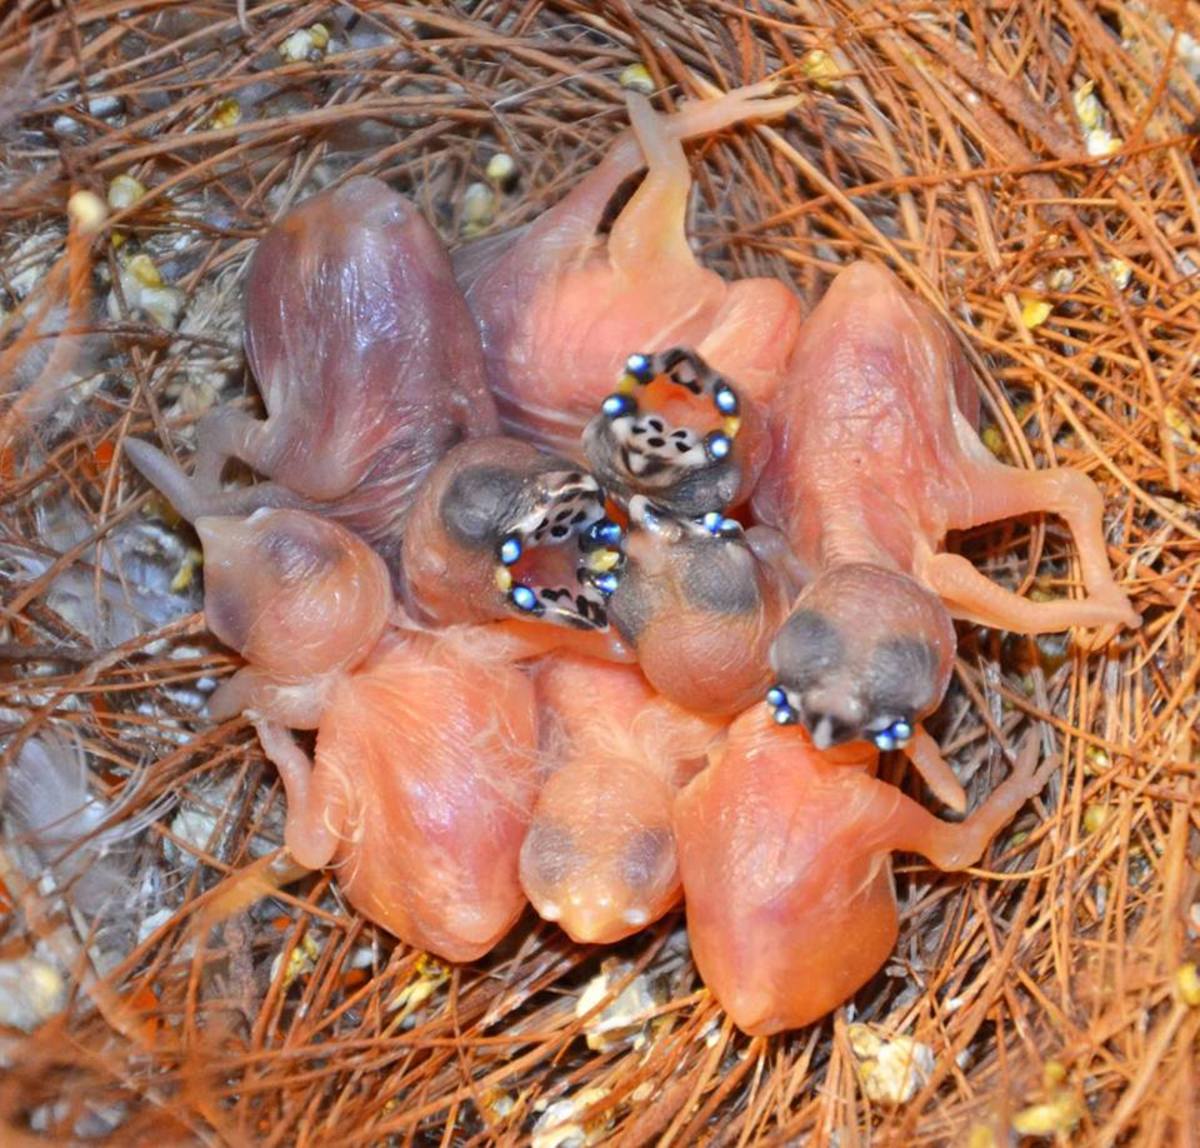 Newly-hatched Gouldian finch chicks.